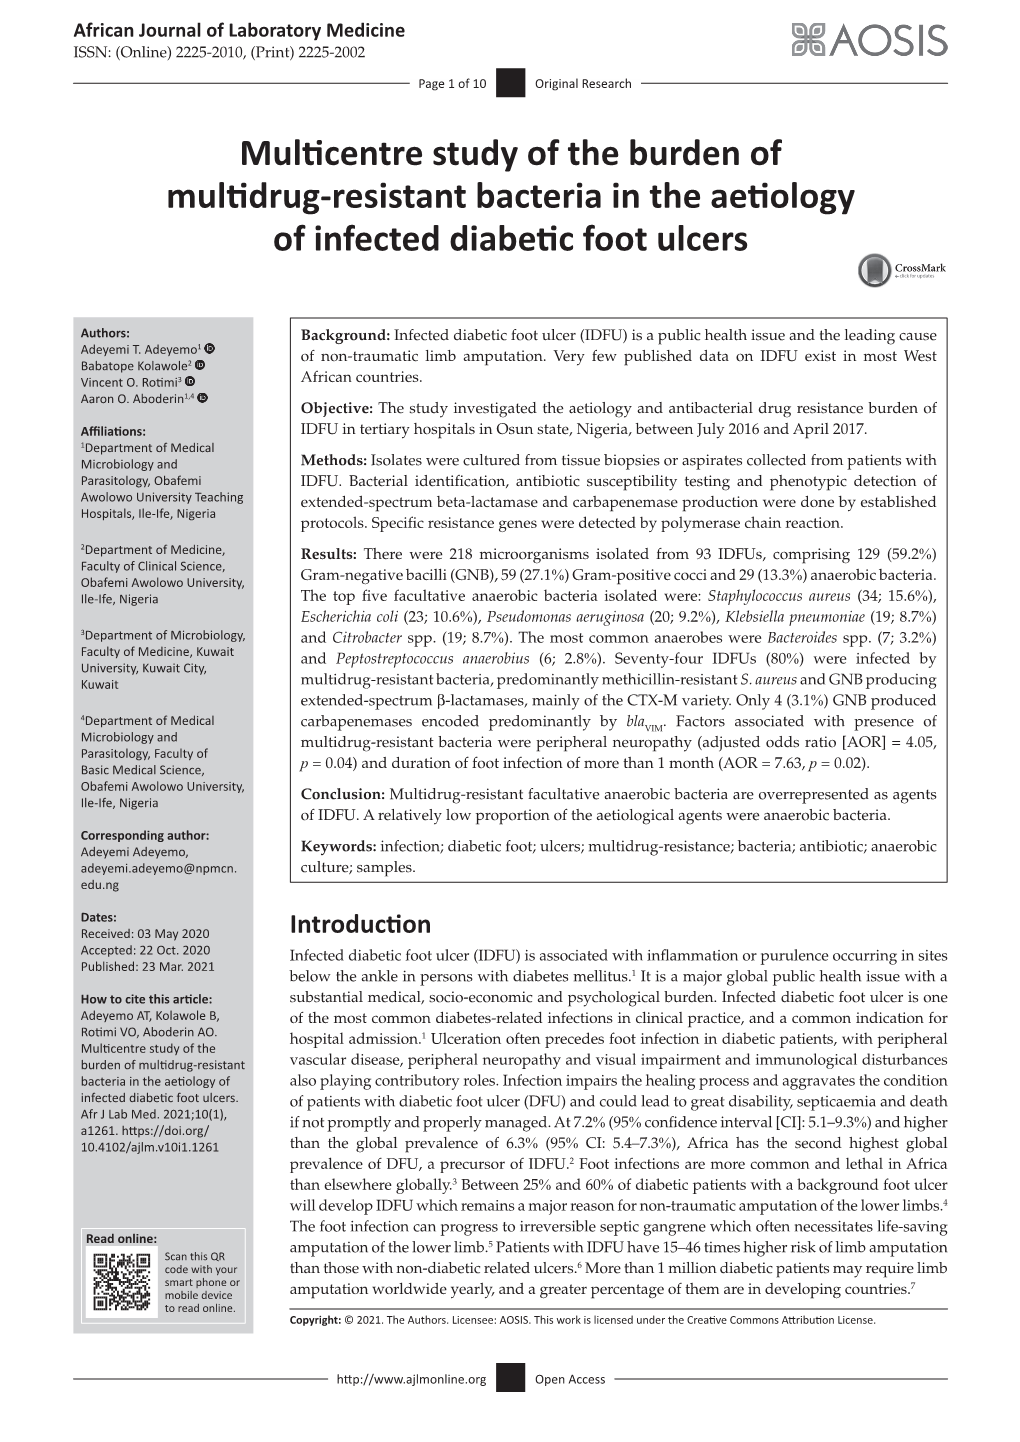 Multicentre Study of the Burden of Multidrug-Resistant Bacteria in the Aetiology of Infected Diabetic Foot Ulcers